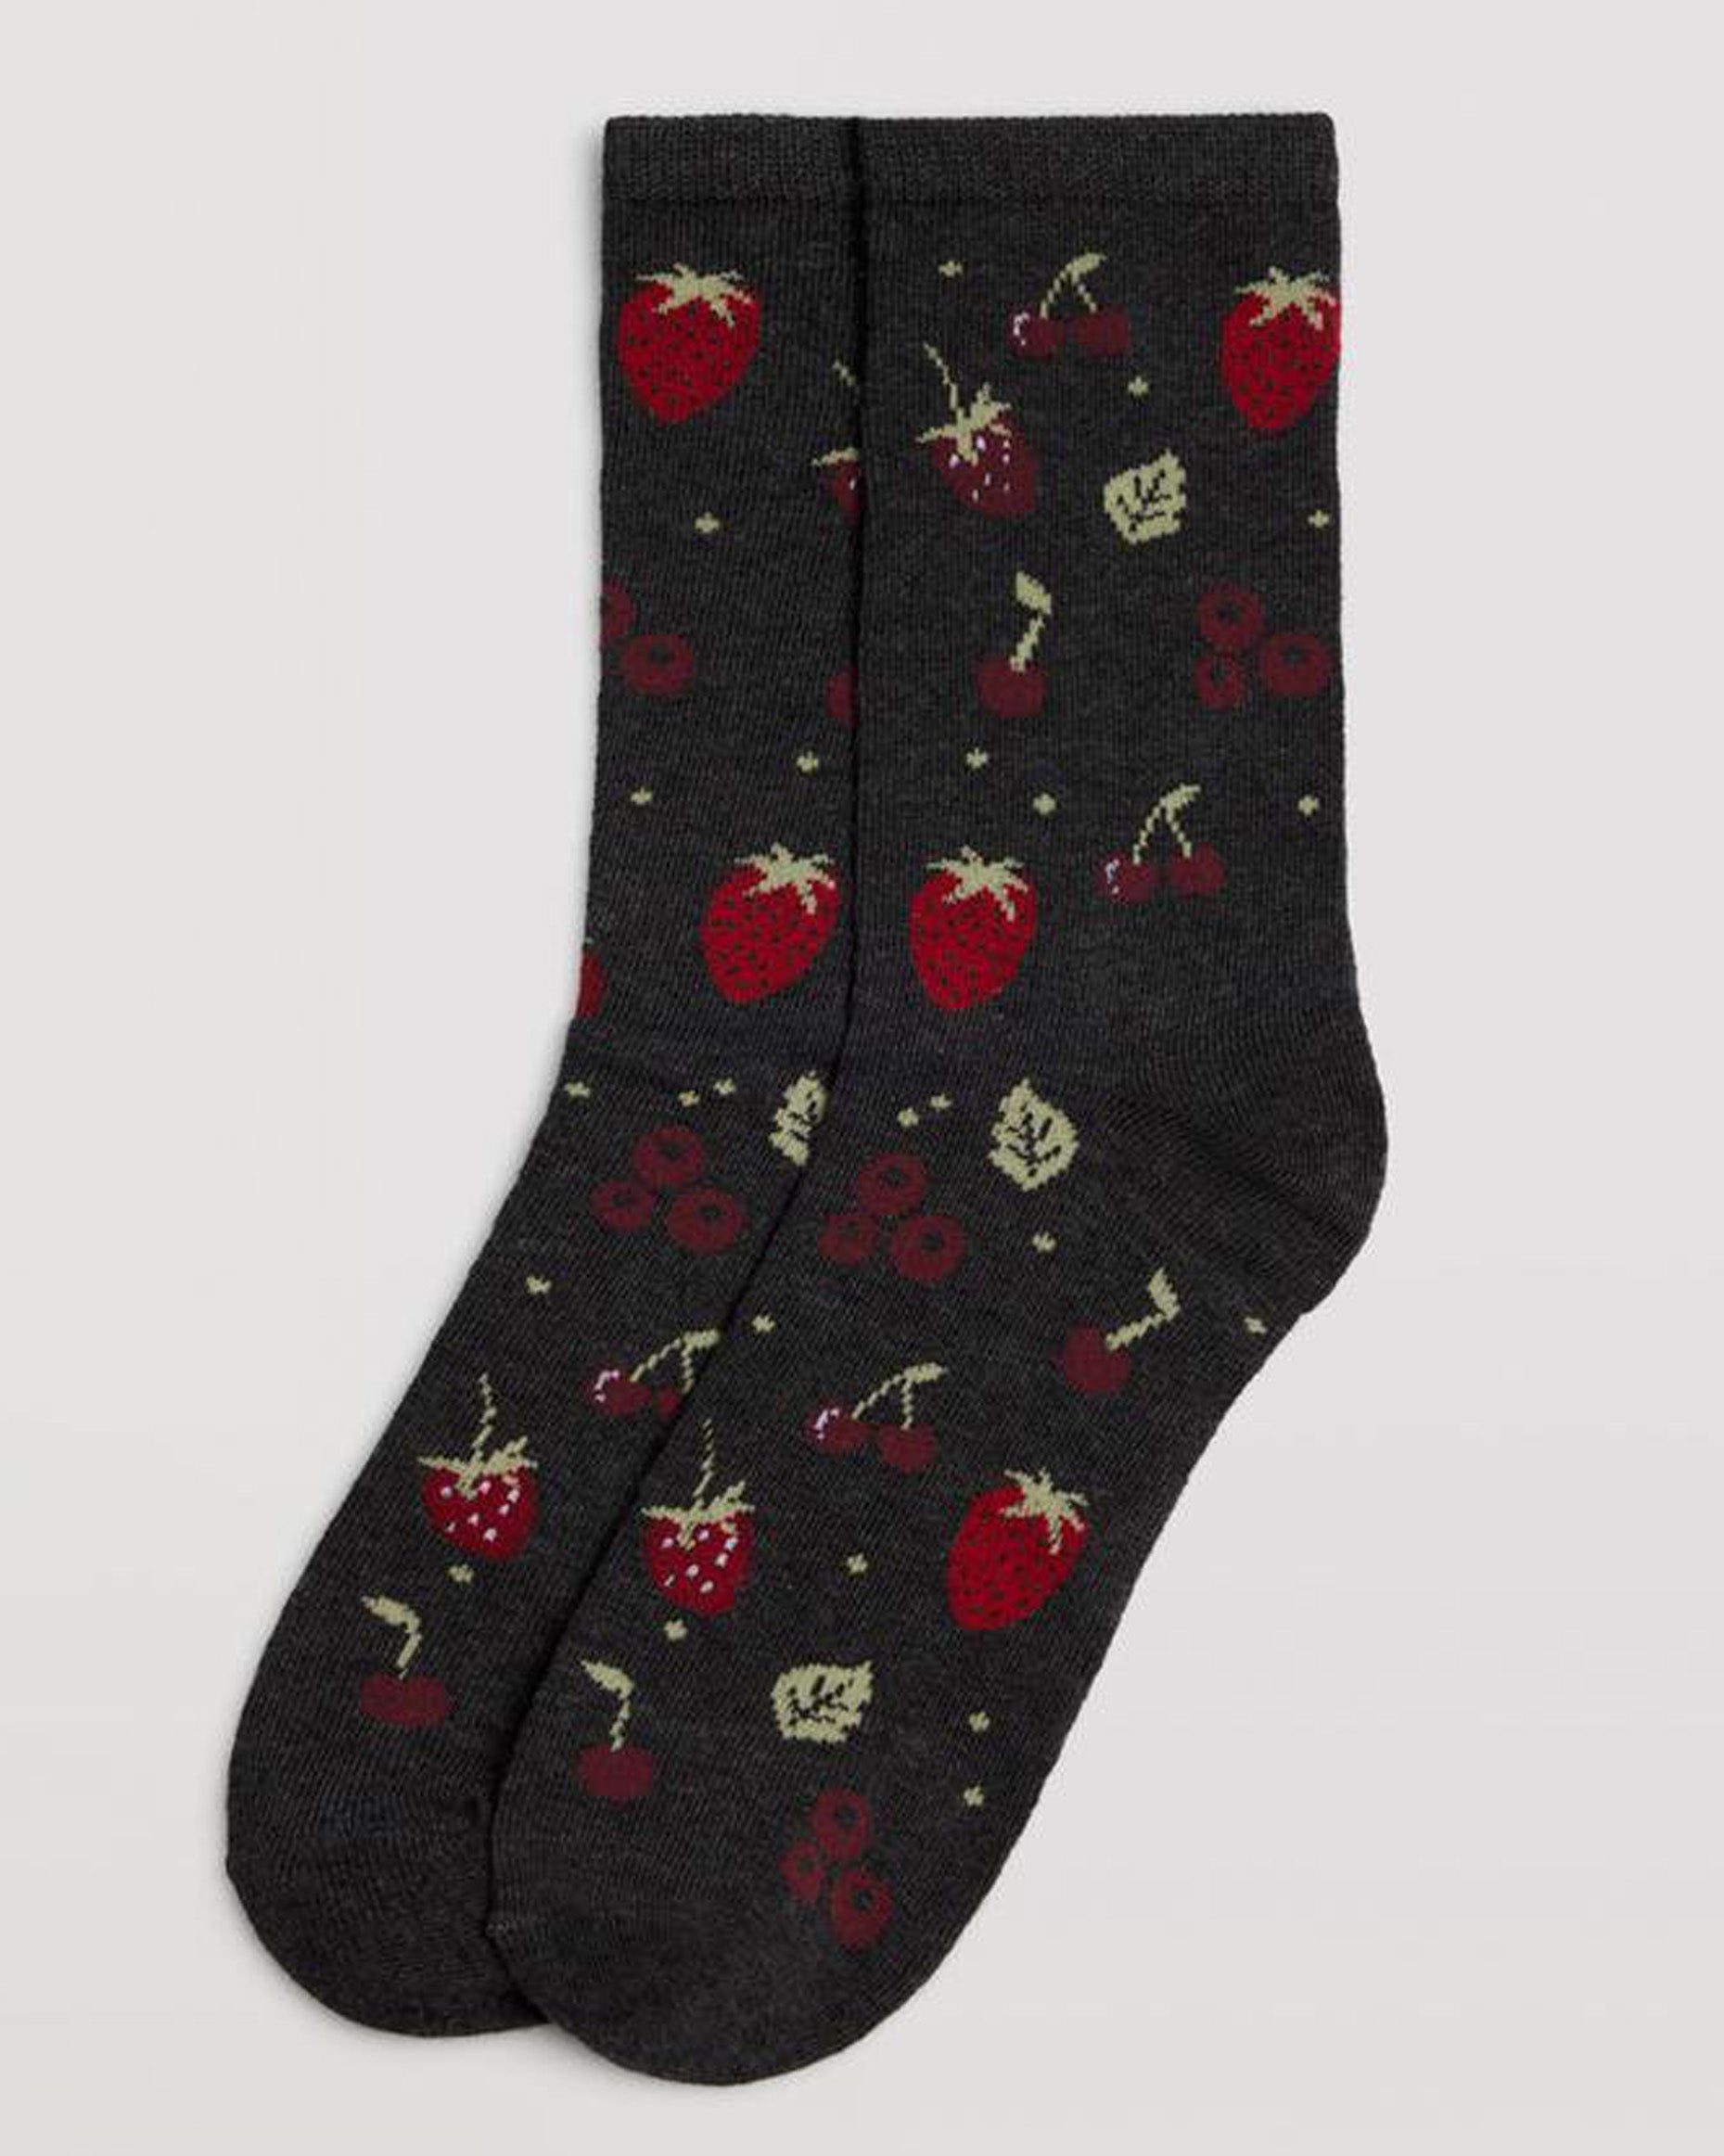 Ysabel Mora 12875 Mixed Berry Sock - Dark grey cotton crew socks with a pattern of mixed berries (strawberries, cherries, blackberries and raspberries) in shades of red and wine with sage green leaves and stems, shaped heel, flat toe seam and plain elasticated cuff.